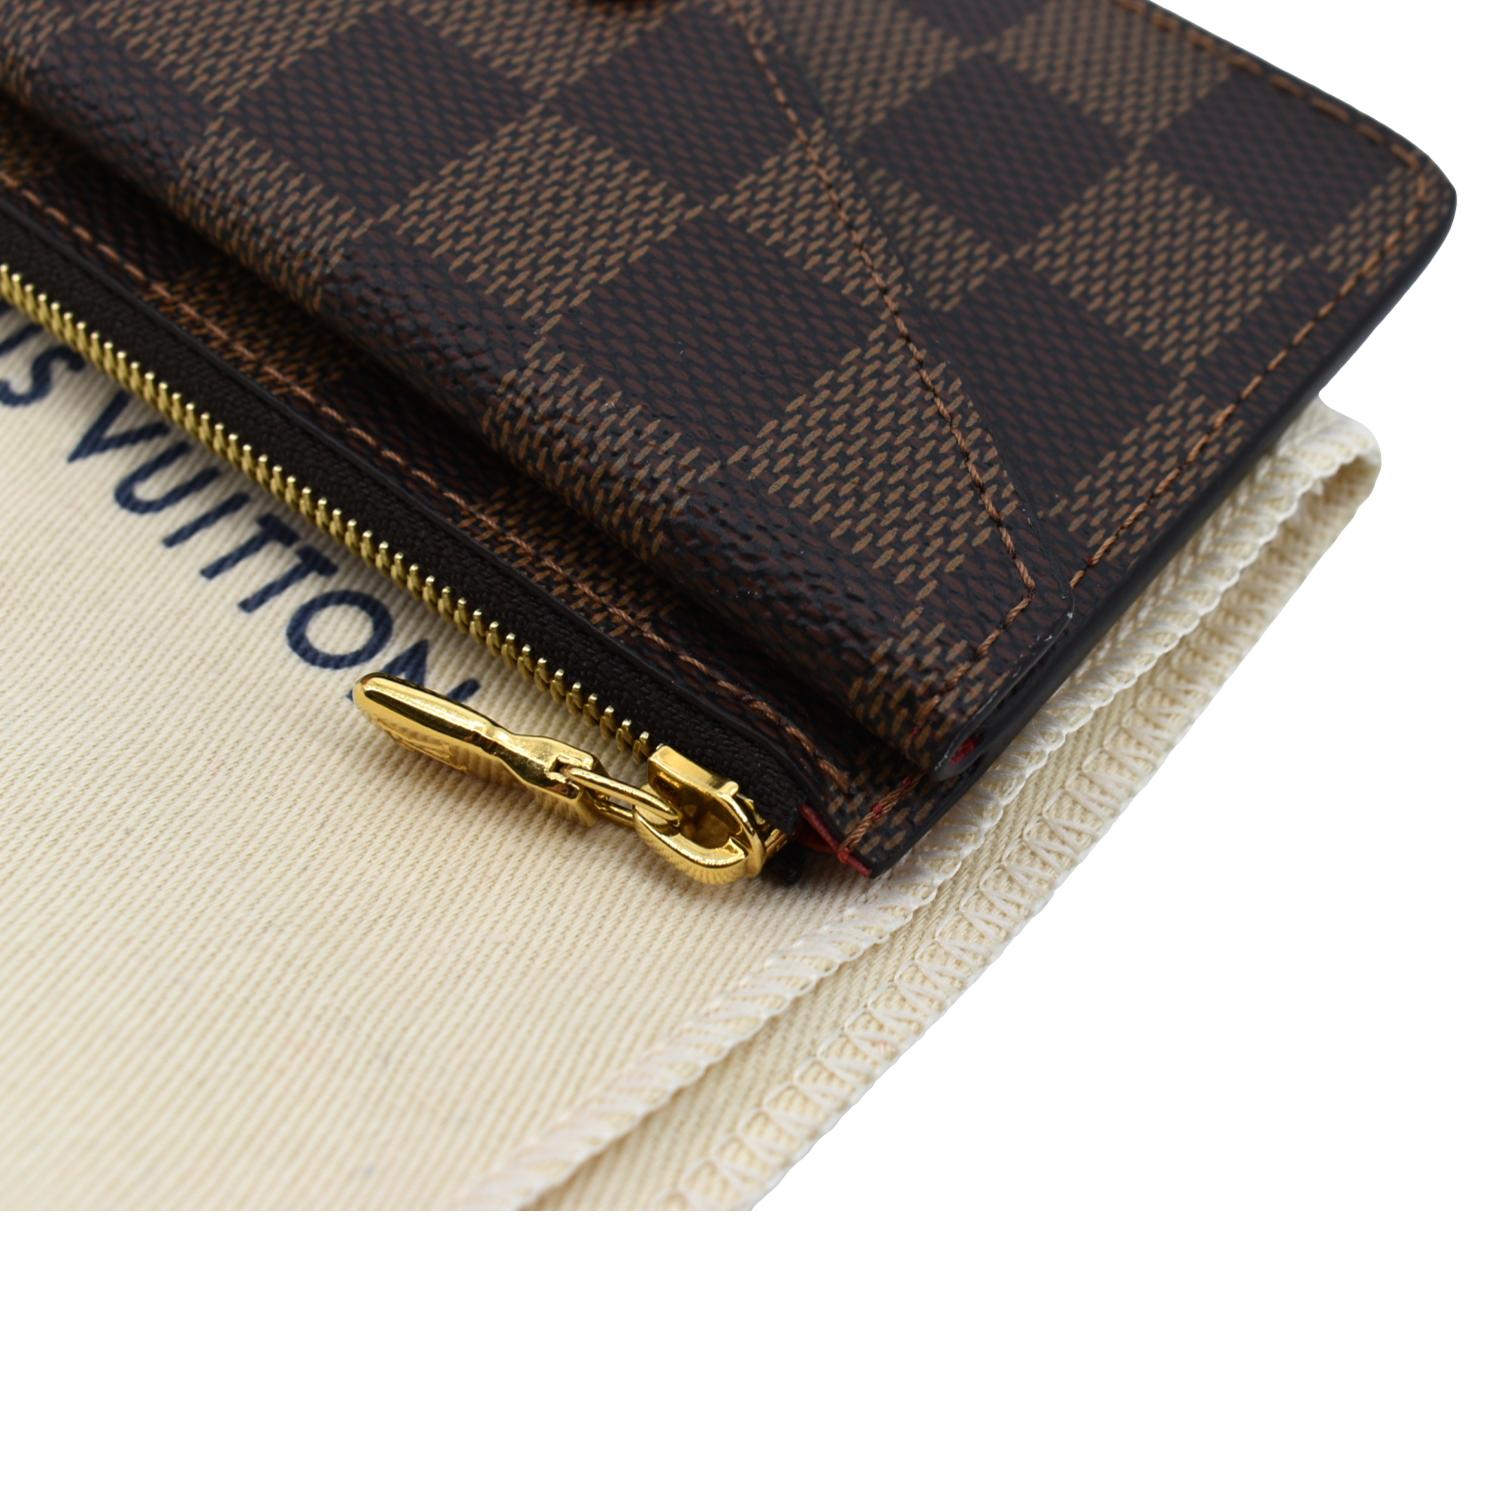 NEW AUTHENTIC LOUIS VUITTON CARD HOLDER RECTO VERSO WALLET